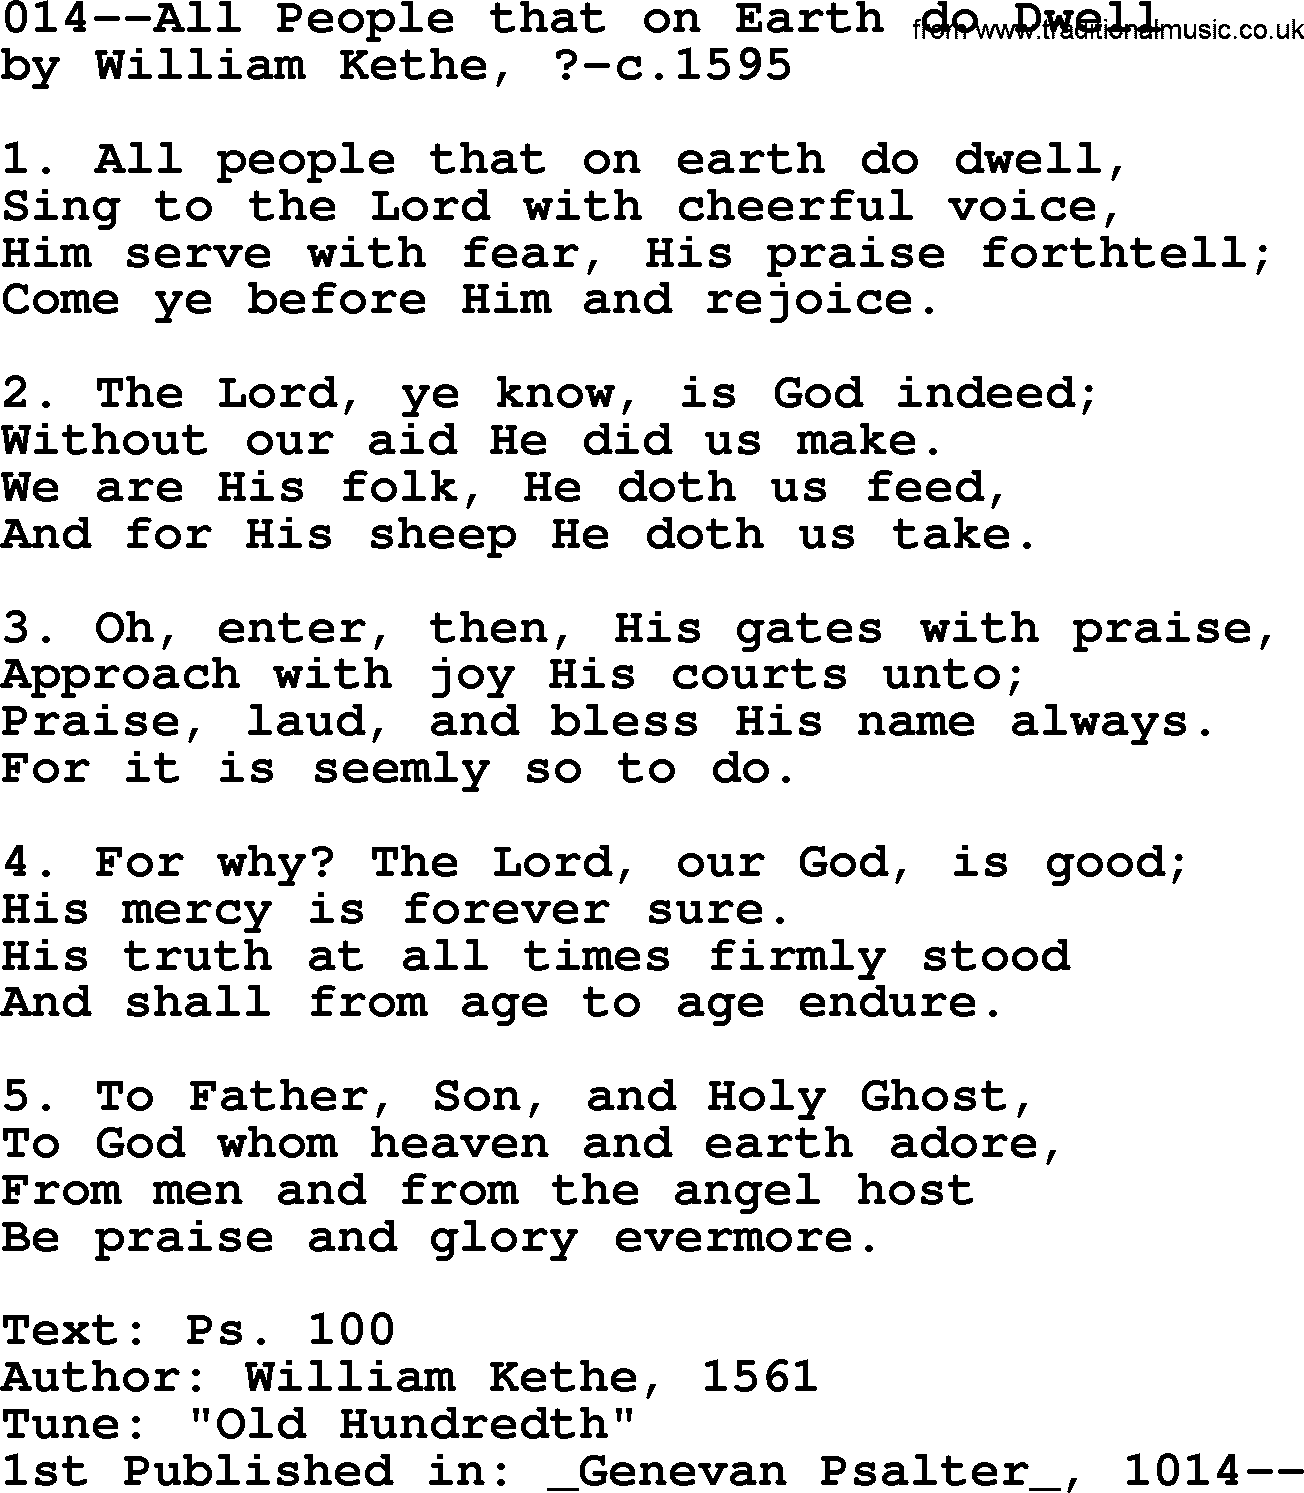 Lutheran Hymn: 014--All People that on Earth do Dwell.txt lyrics with PDF